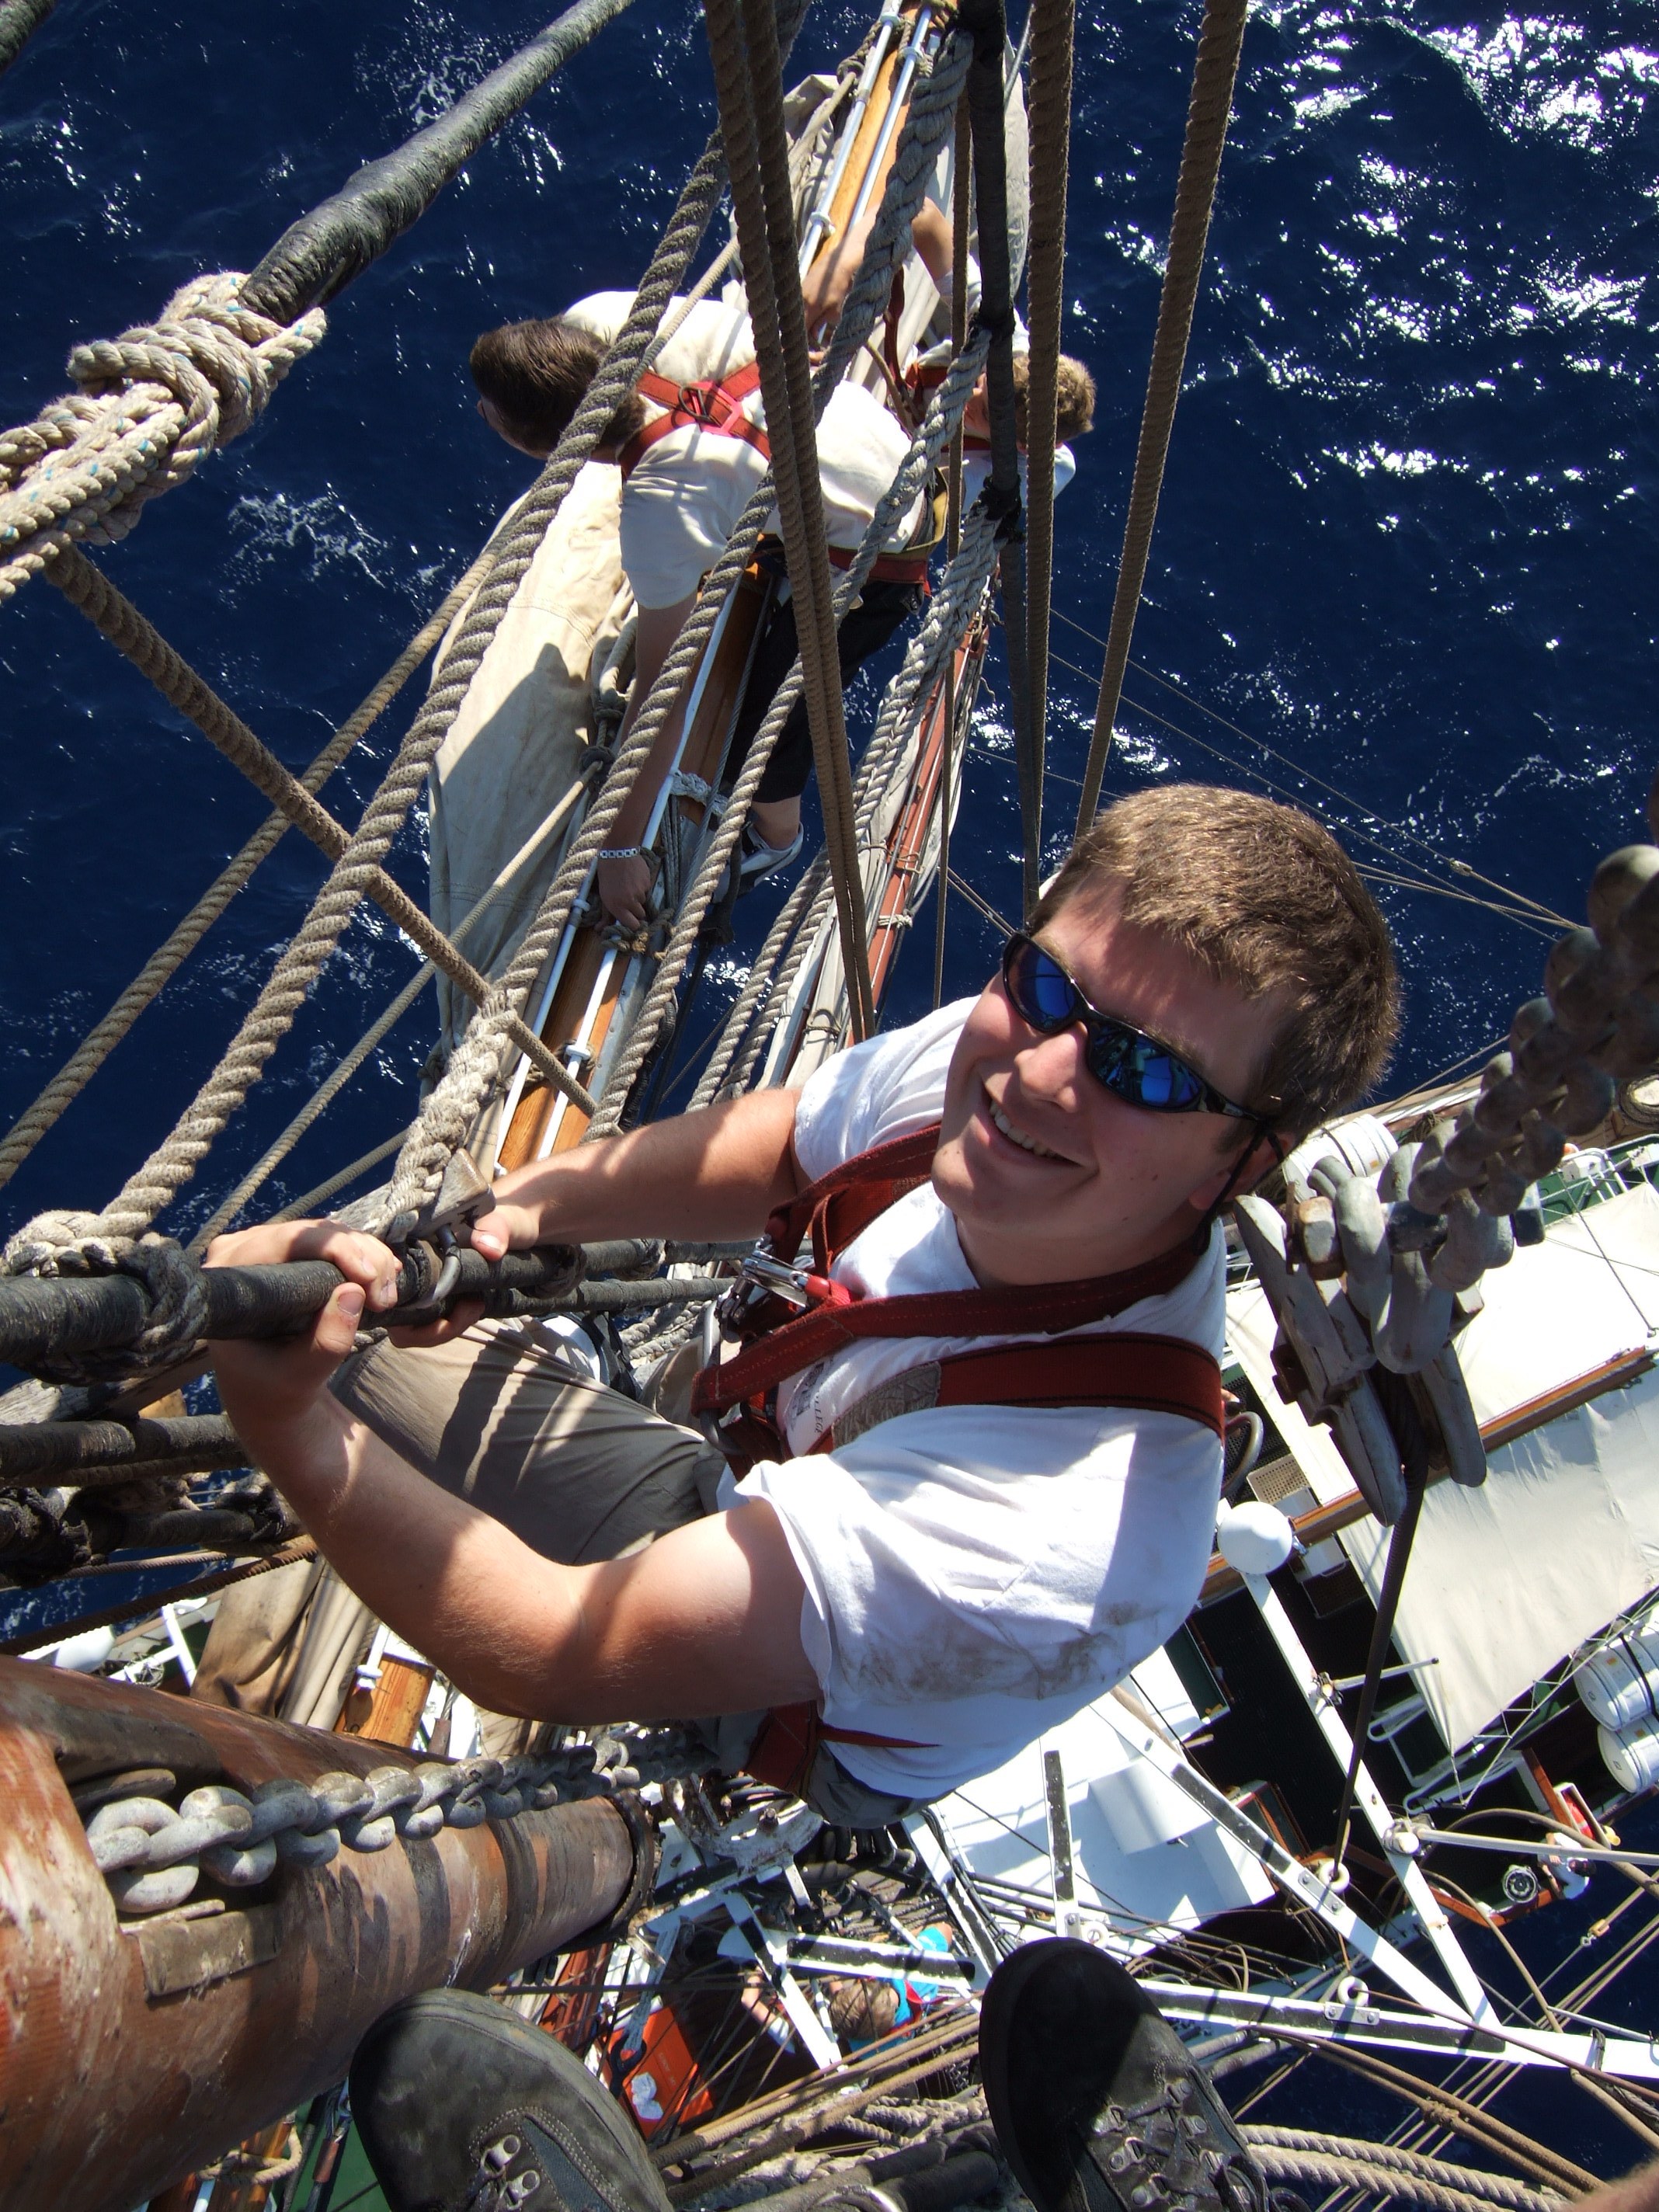 A photograph of me aboard the tall ship Stavros S Niarchos. (Credit: Nick Maynard)